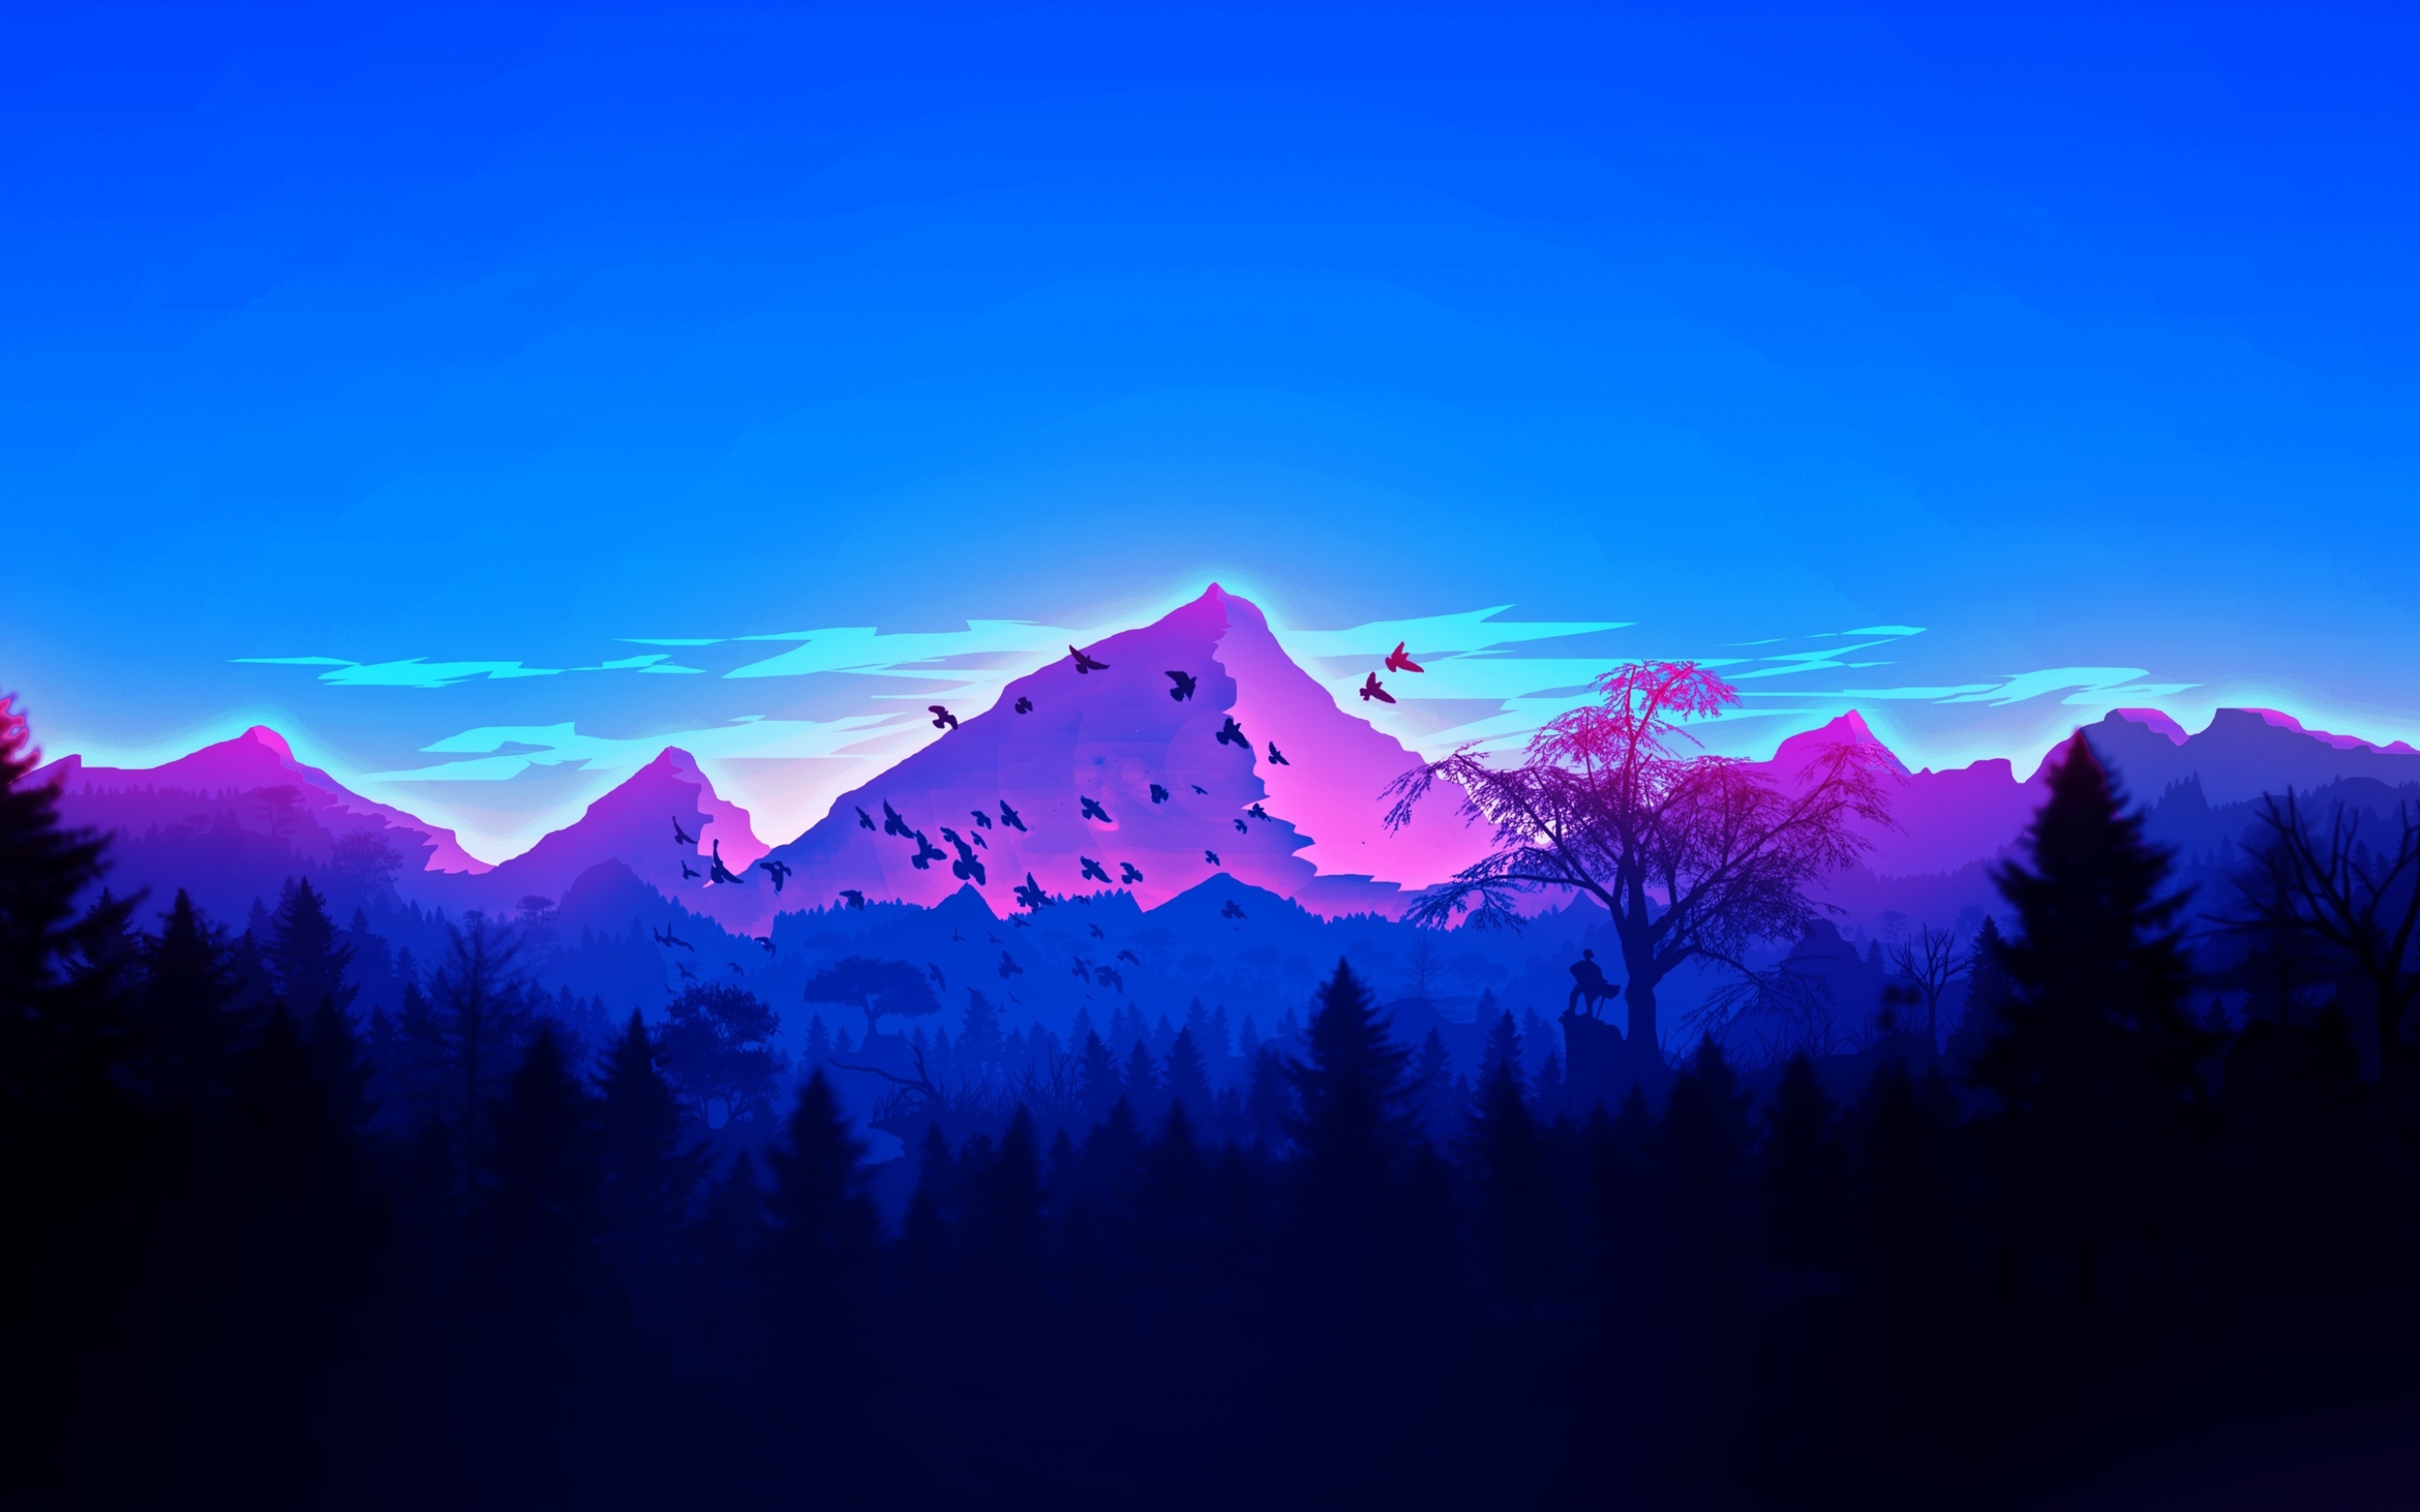 x1800 Vaporwave Minimalism Forest Macbook Pro Retina Wallpaper Hd Artist 4k Wallpapers Images Photos And Background